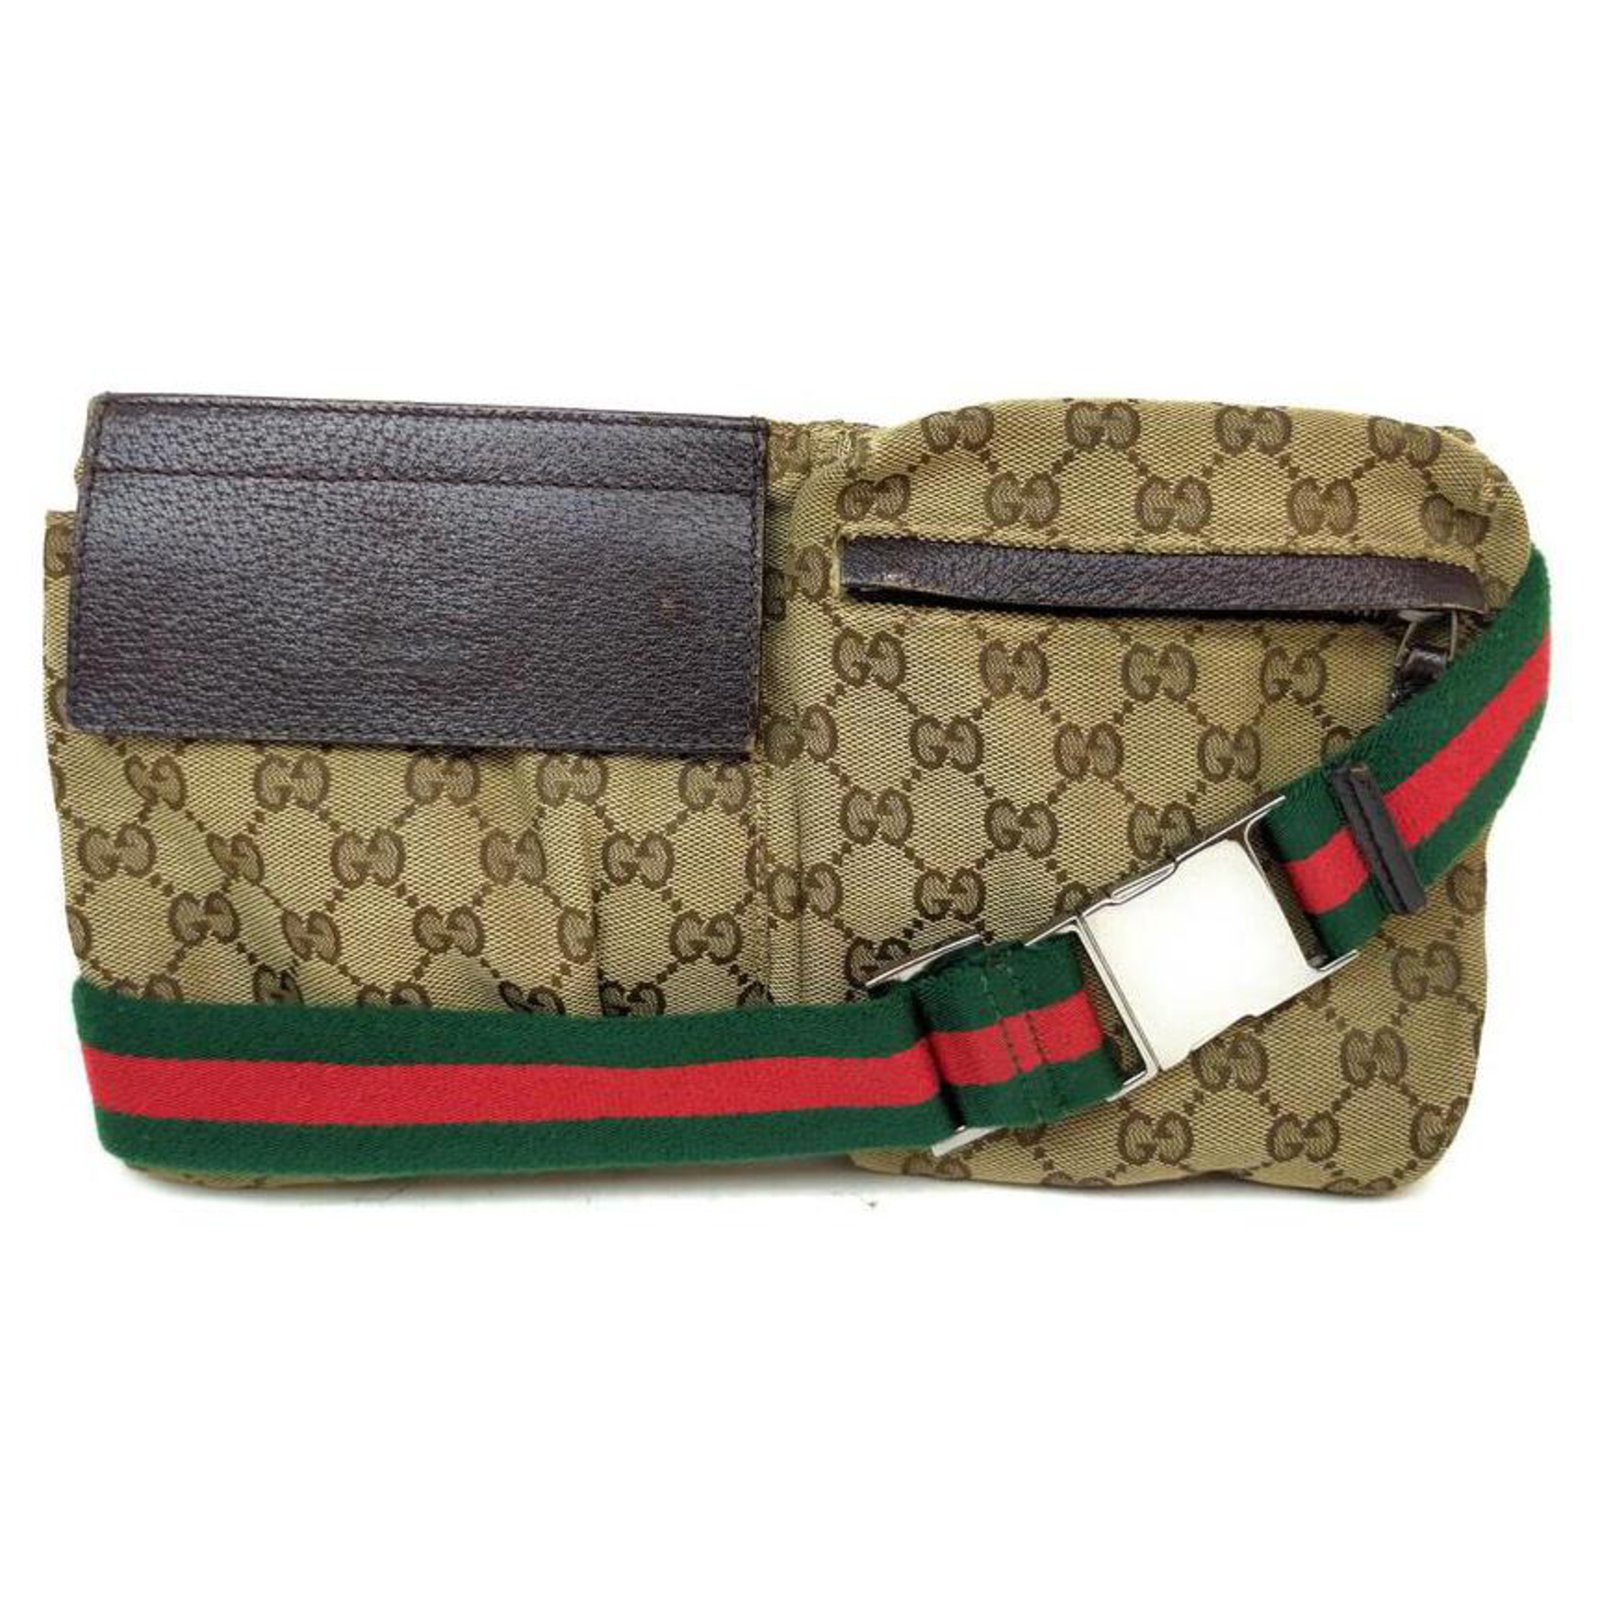 LV and GG Fanny Packs